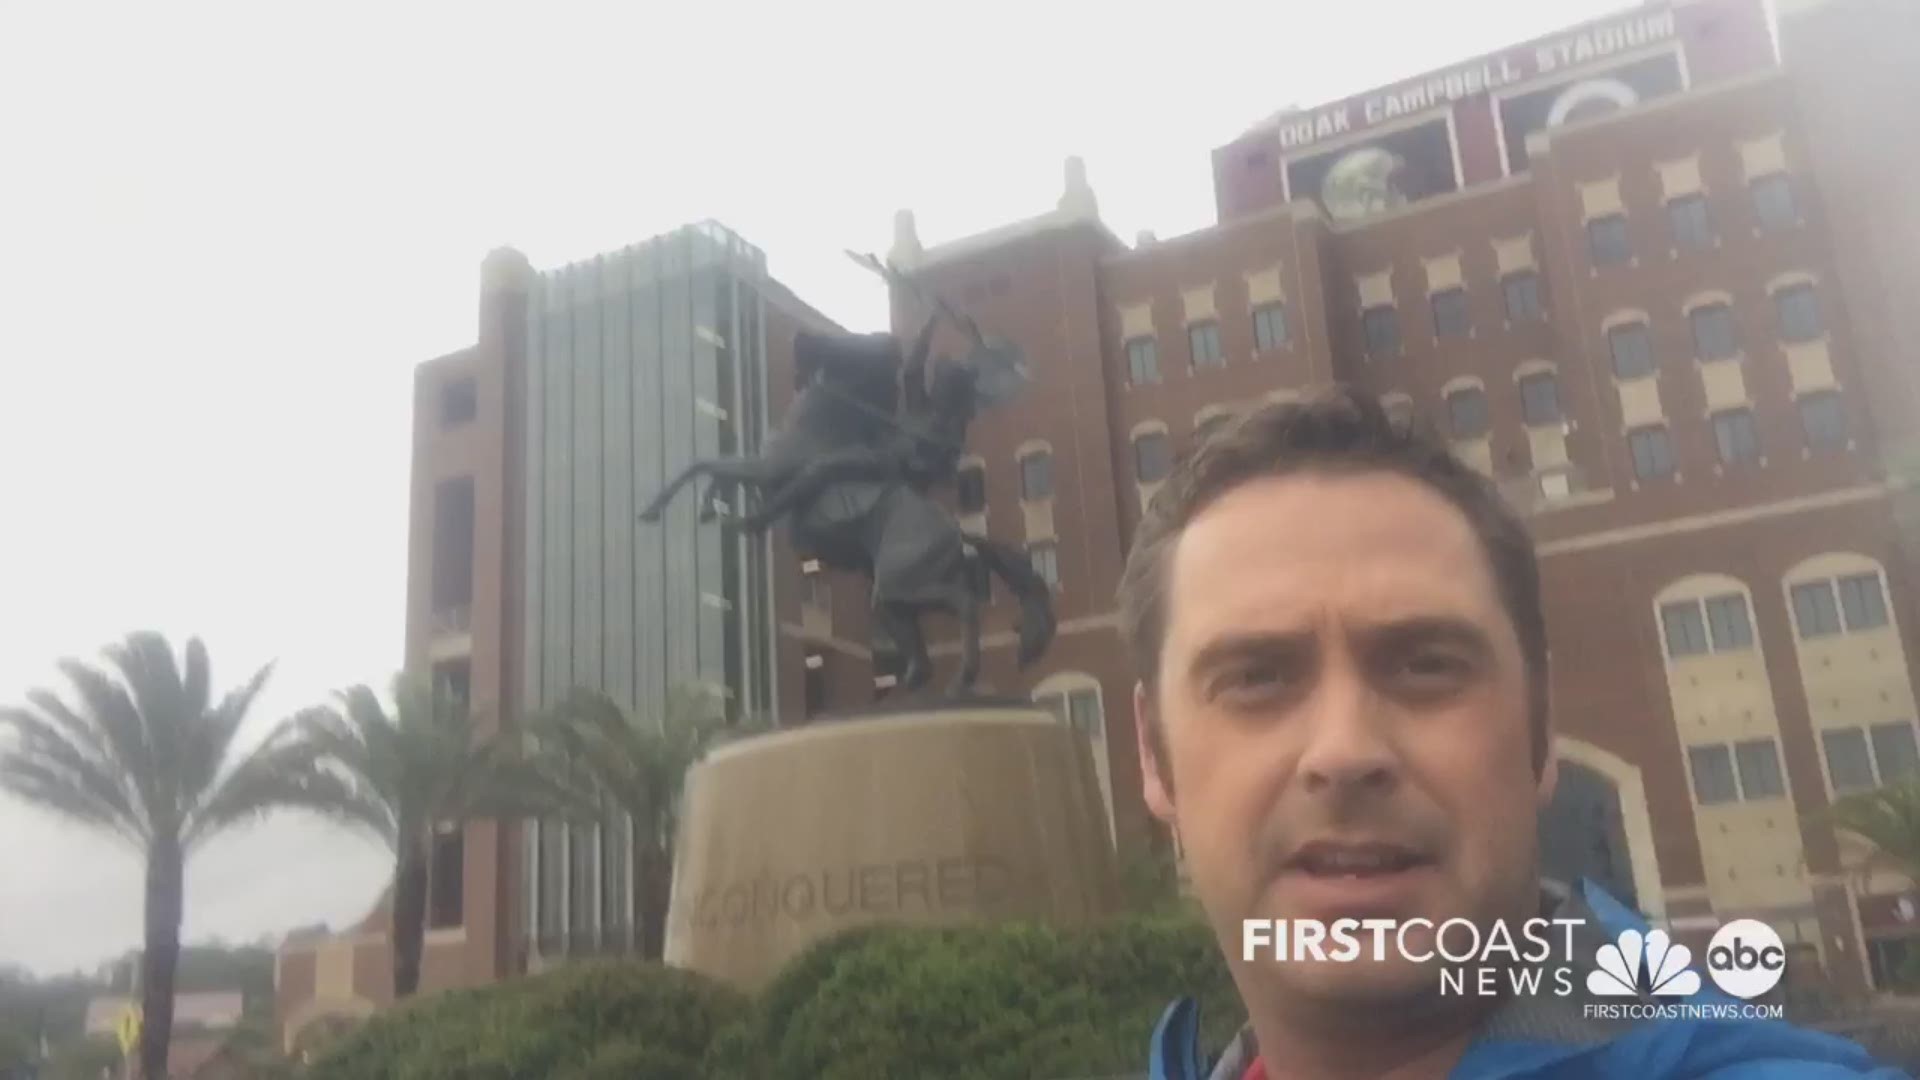 A look at FSU and Tallahassee pre-Hurricane Michael on Wednesday morning.